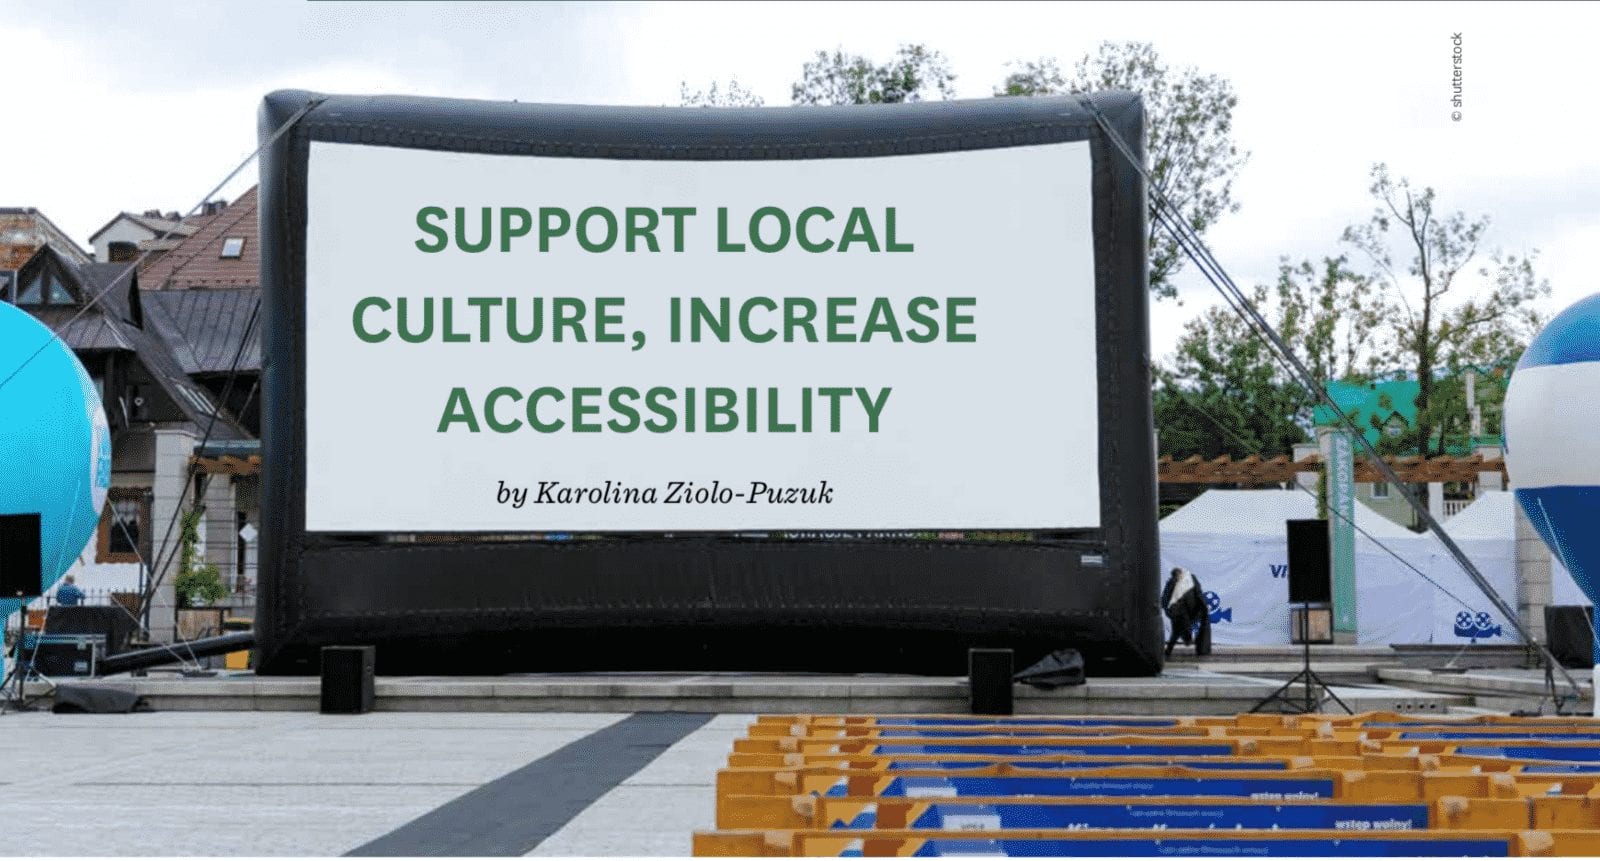 Support local culture, increase accessibility